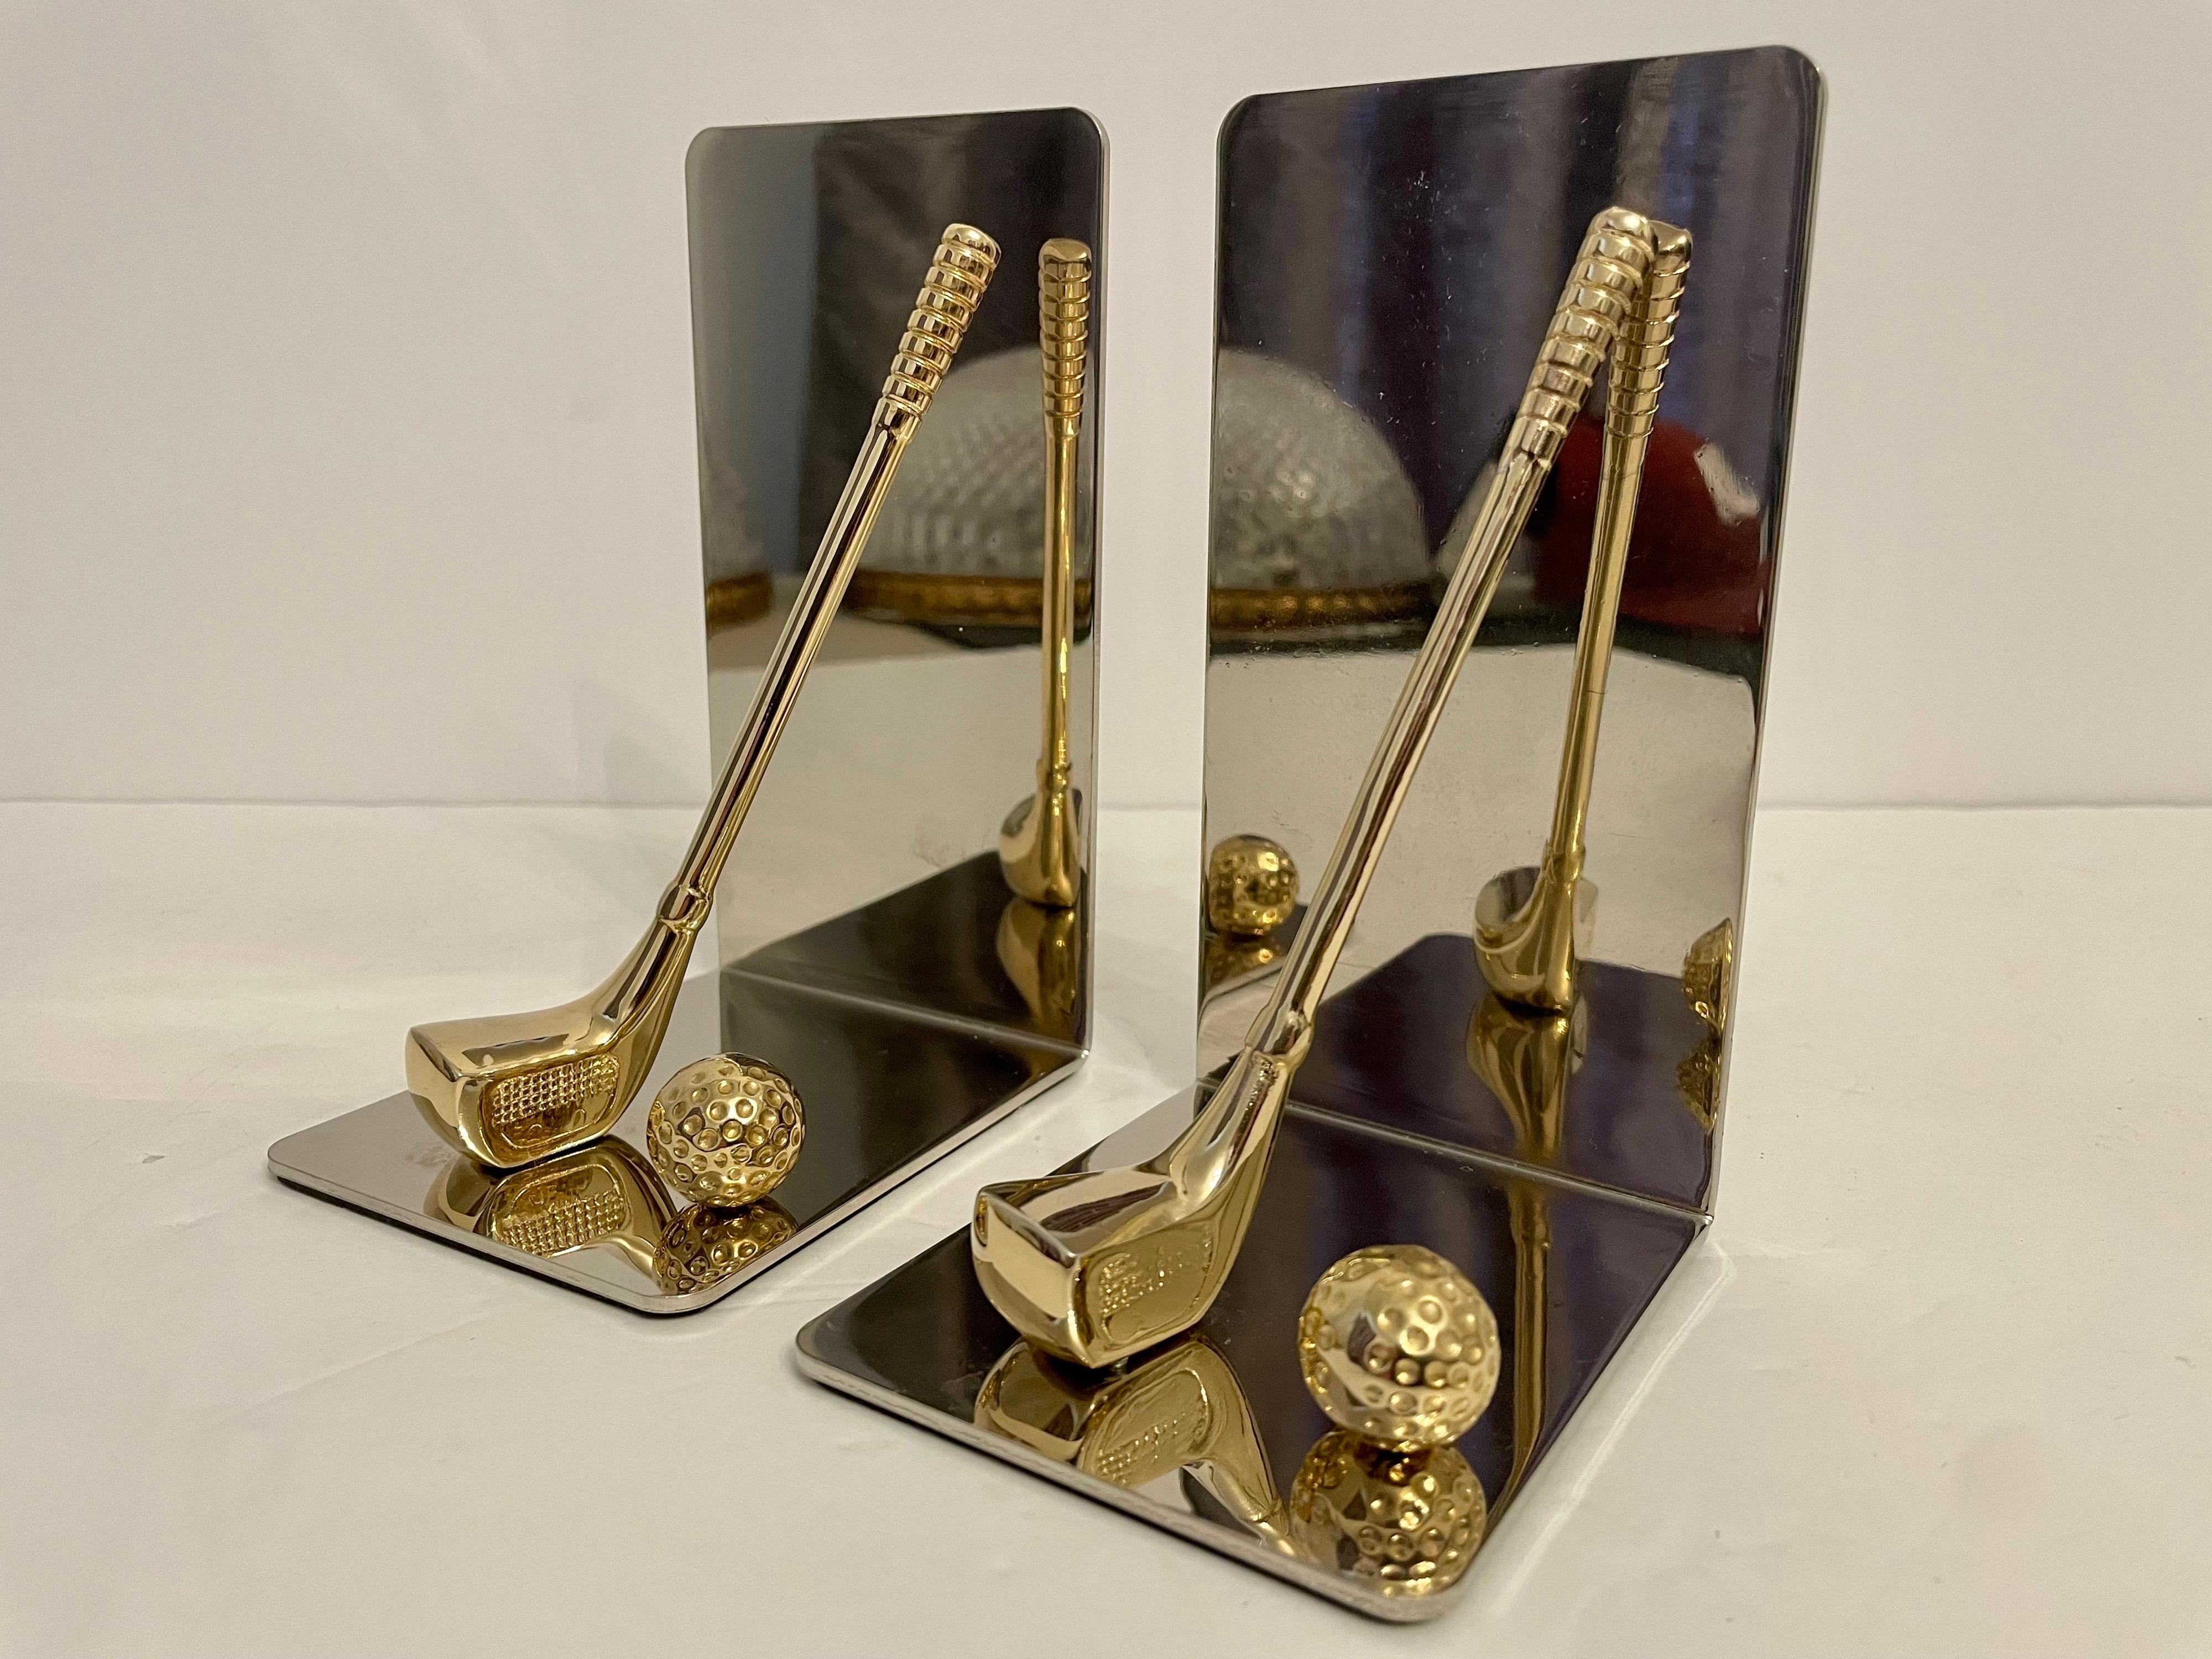 Set of brass and chrome golf bookends featuring brass club and ball with nice detail. Thin foam on bottom to prevent scratching. Great for the golfer or man cave. Good overall condition.